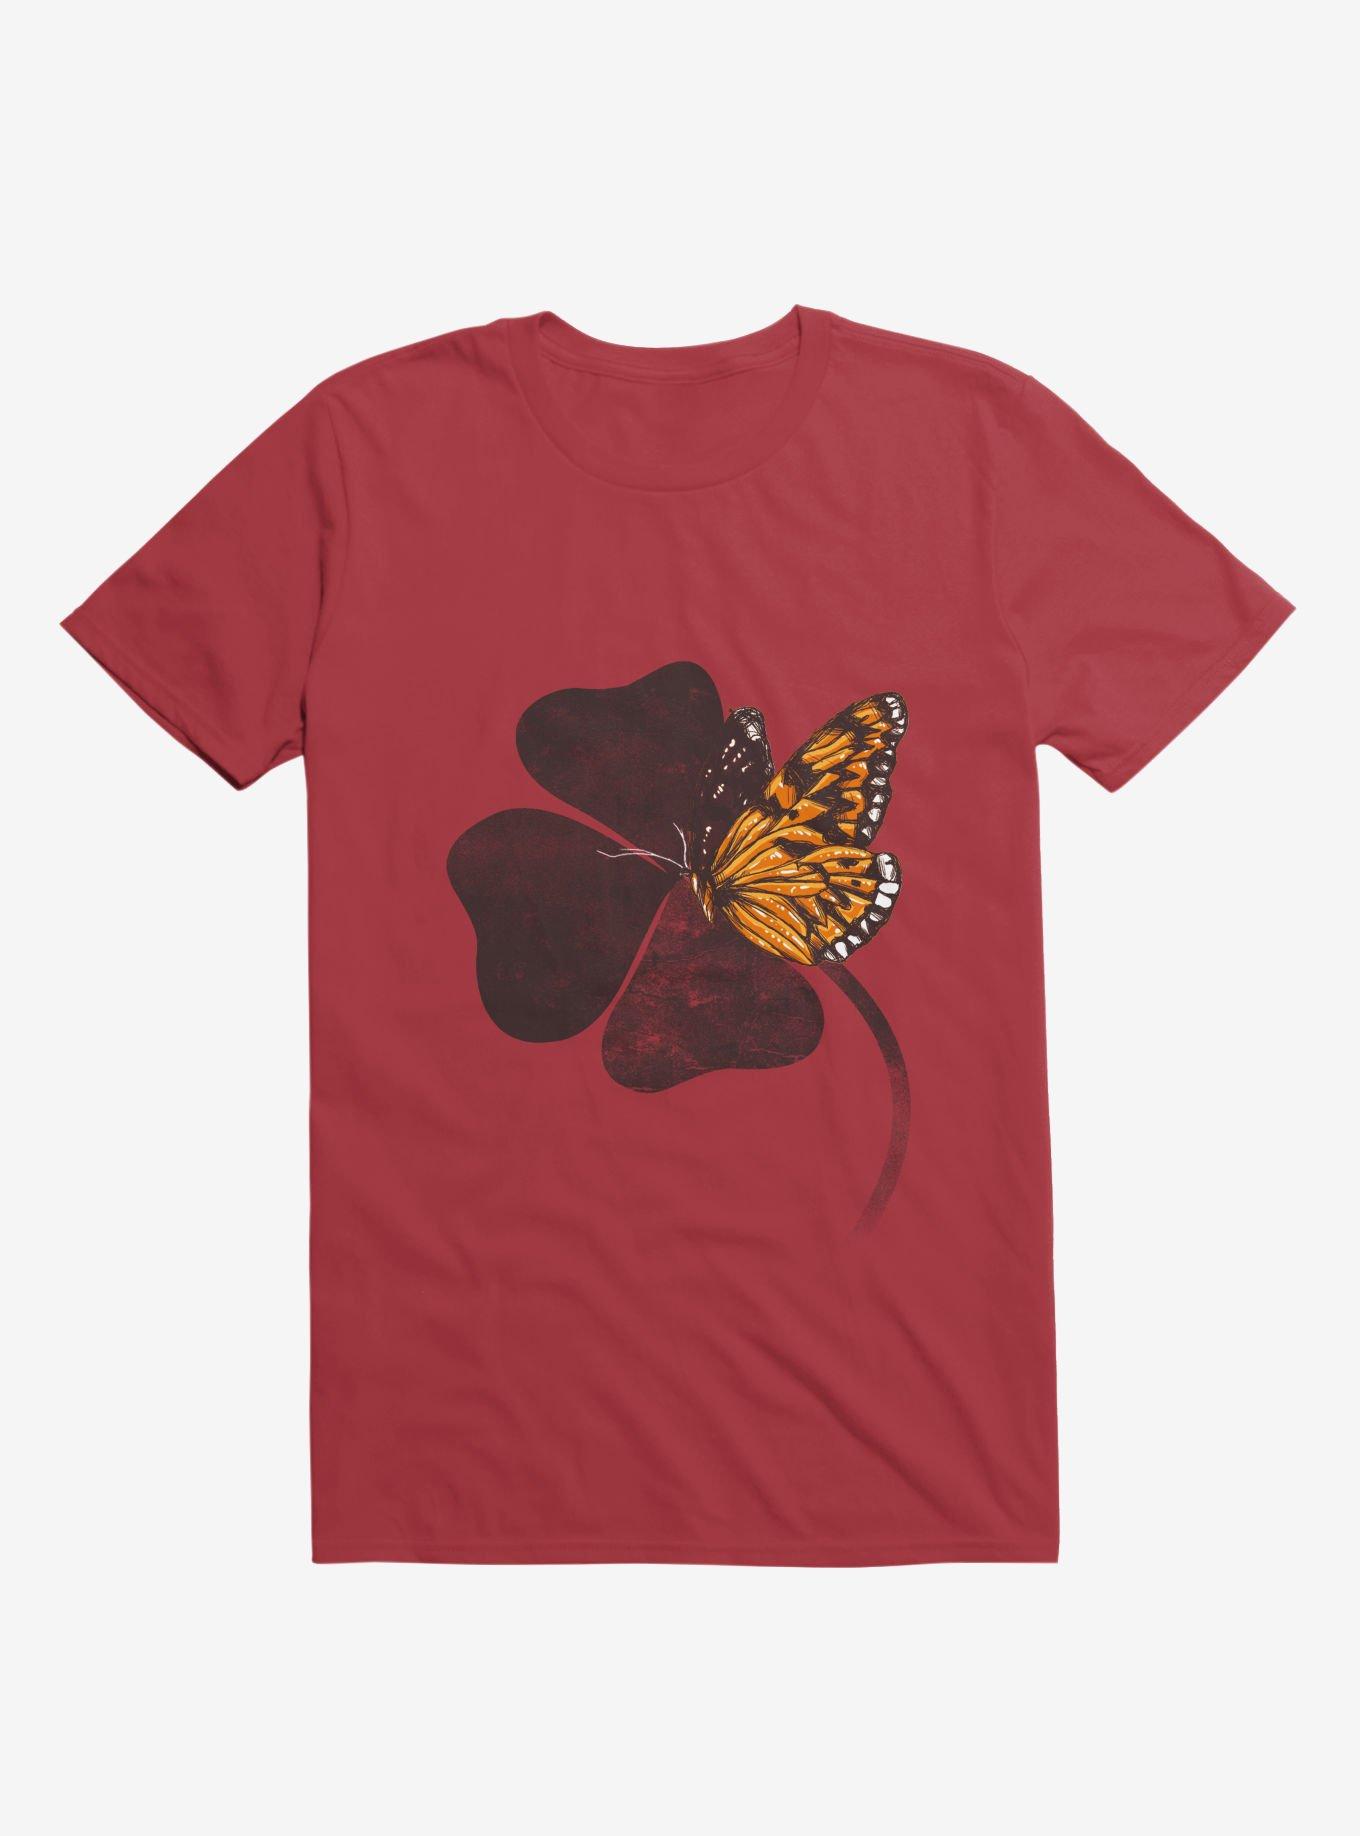 By Chance T-Shirt, RED, hi-res